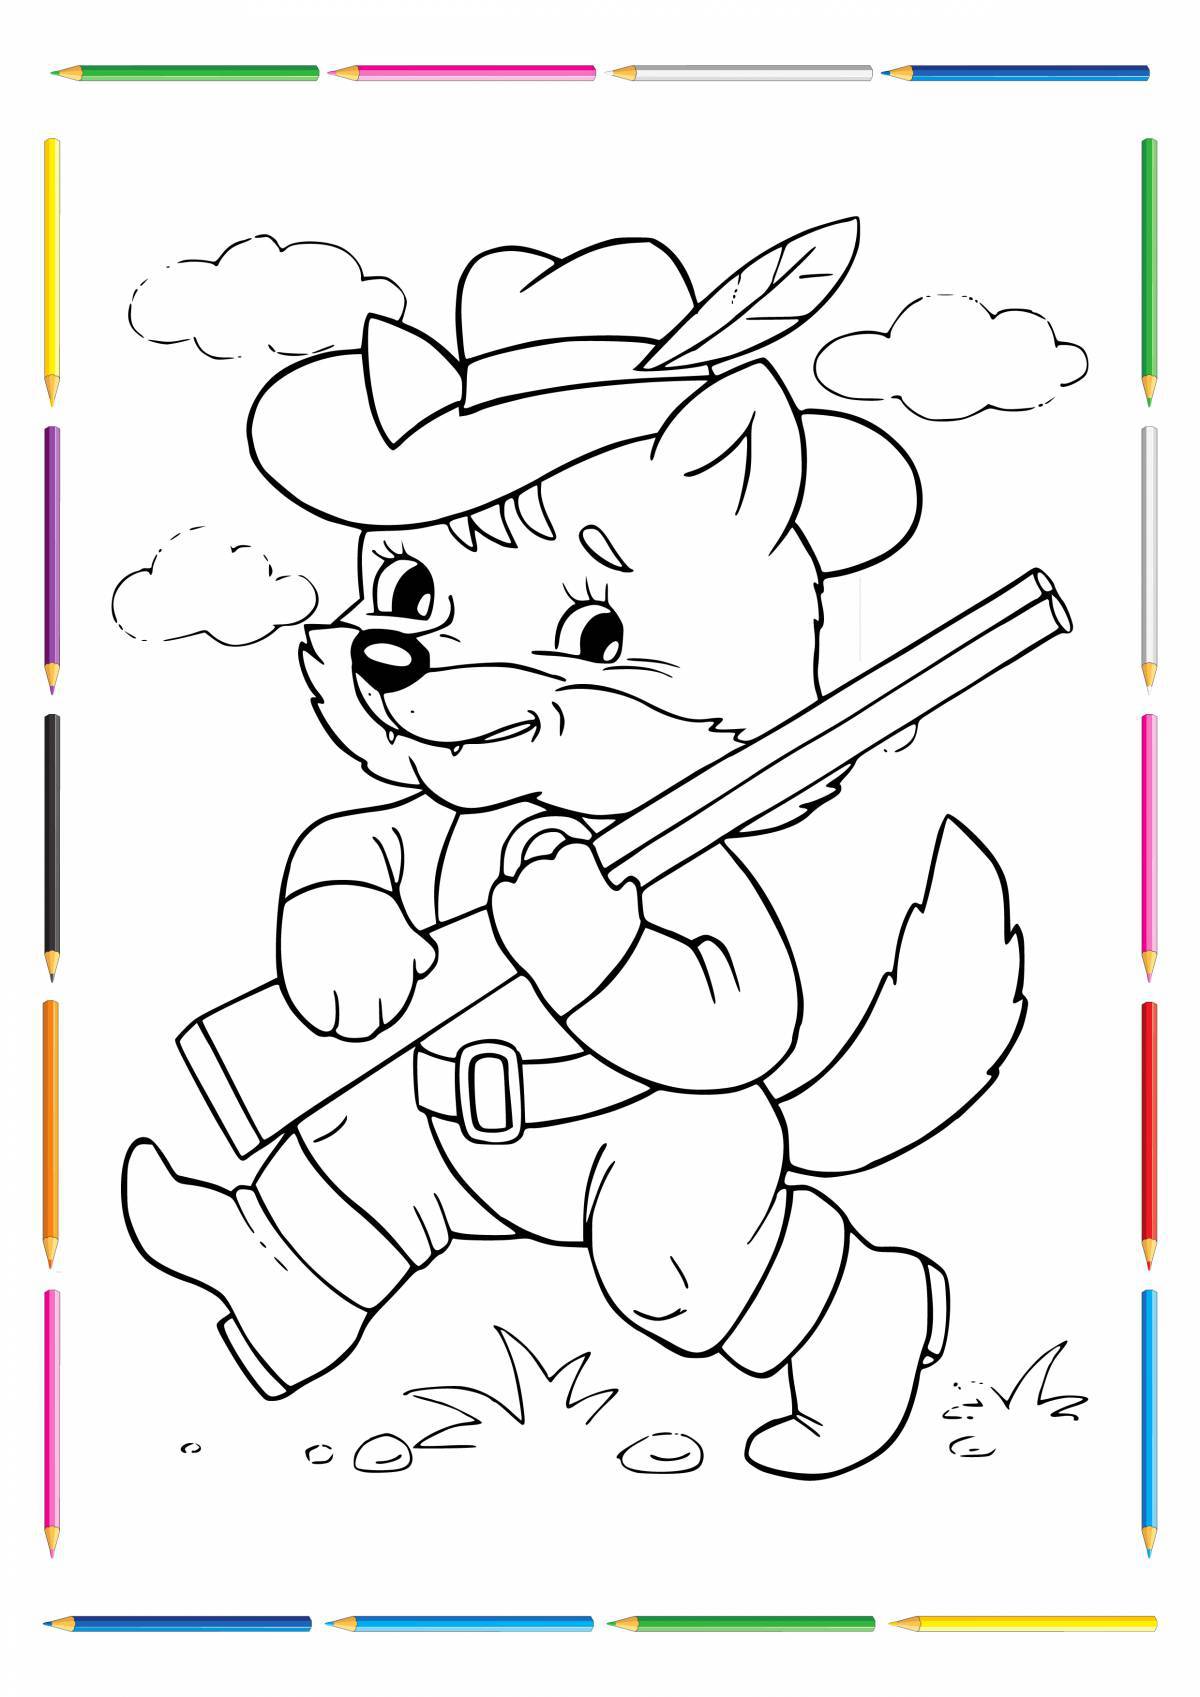 Creative coloring book for children 6-7 years old